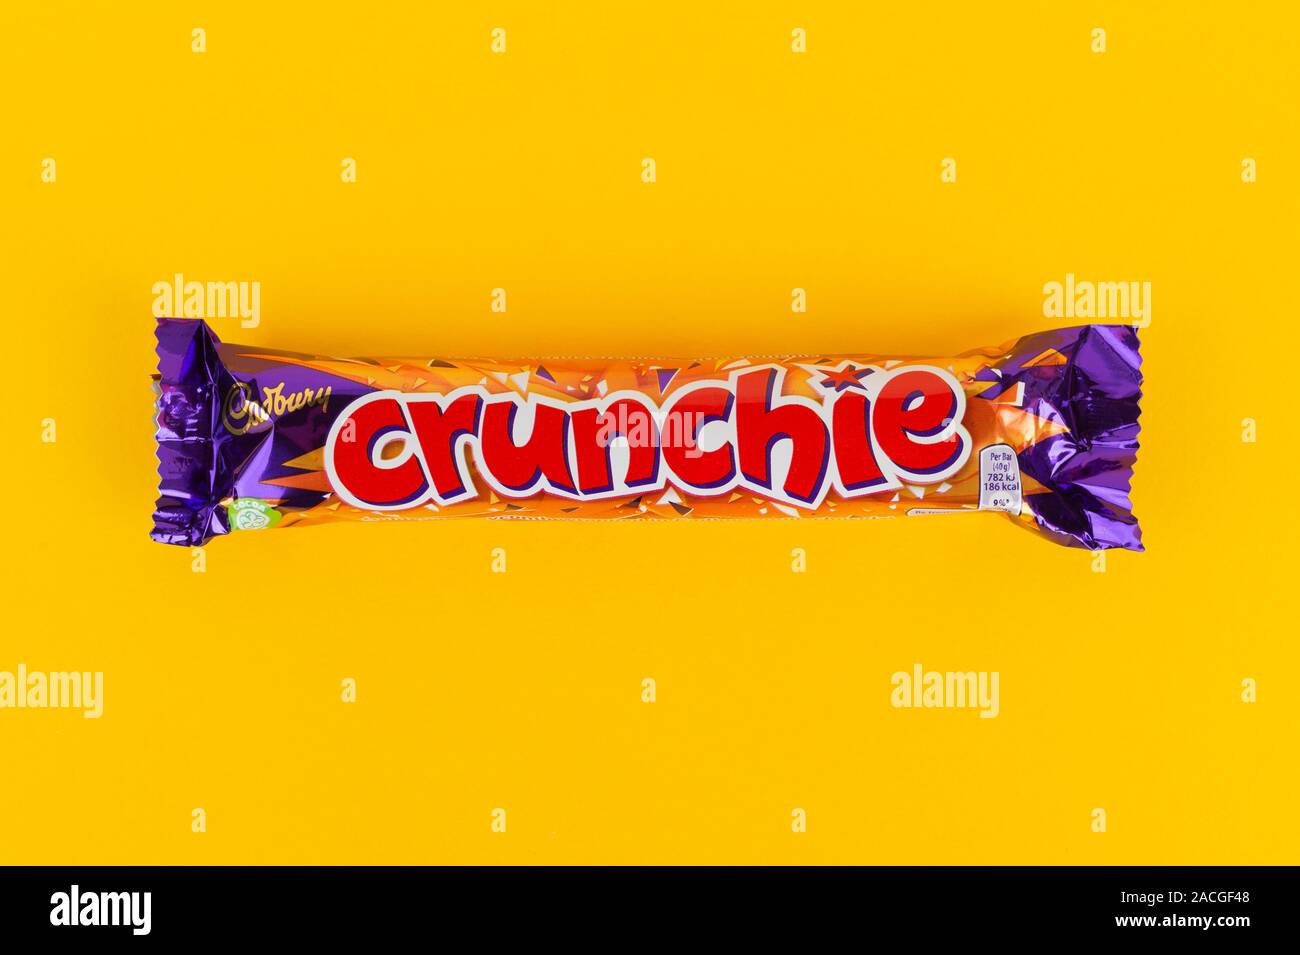 A Crunchie chocolate bar shot on a yellow background. Stock Photo